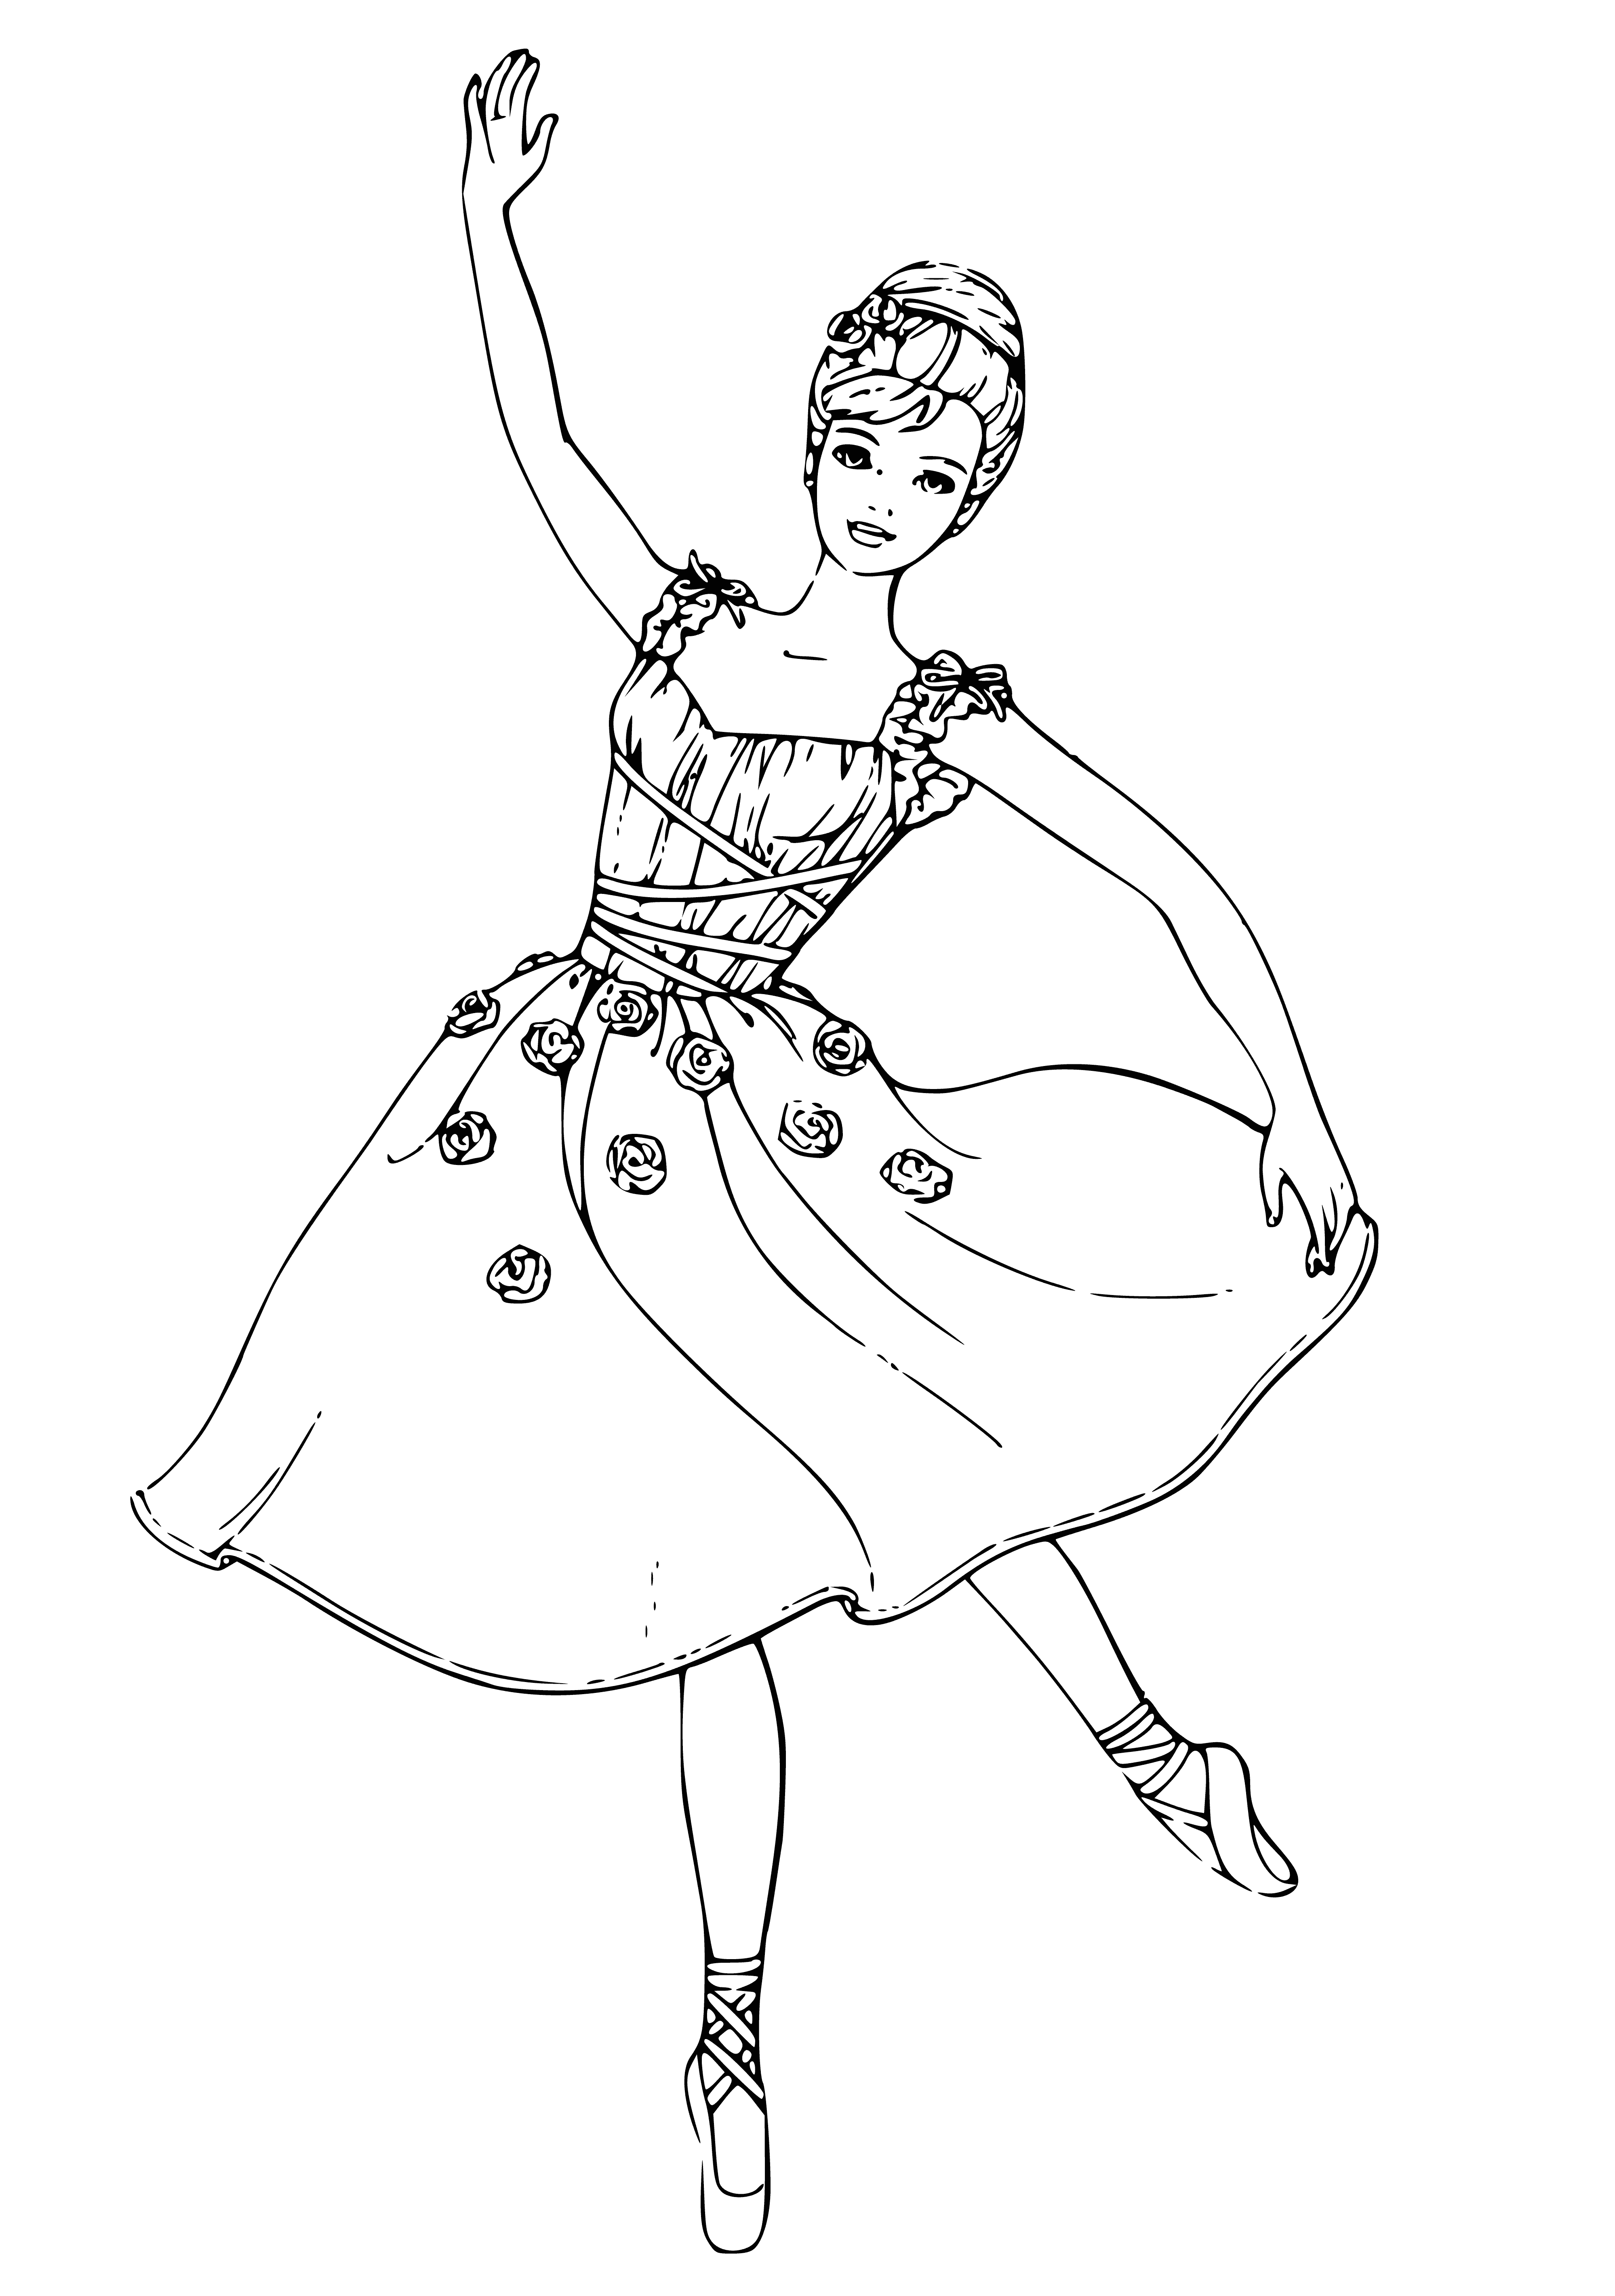 coloring page: Ballerinas wearing tutus & shoes, one stretching & one holding foot up, admiring themselves in the mirror. #ballet